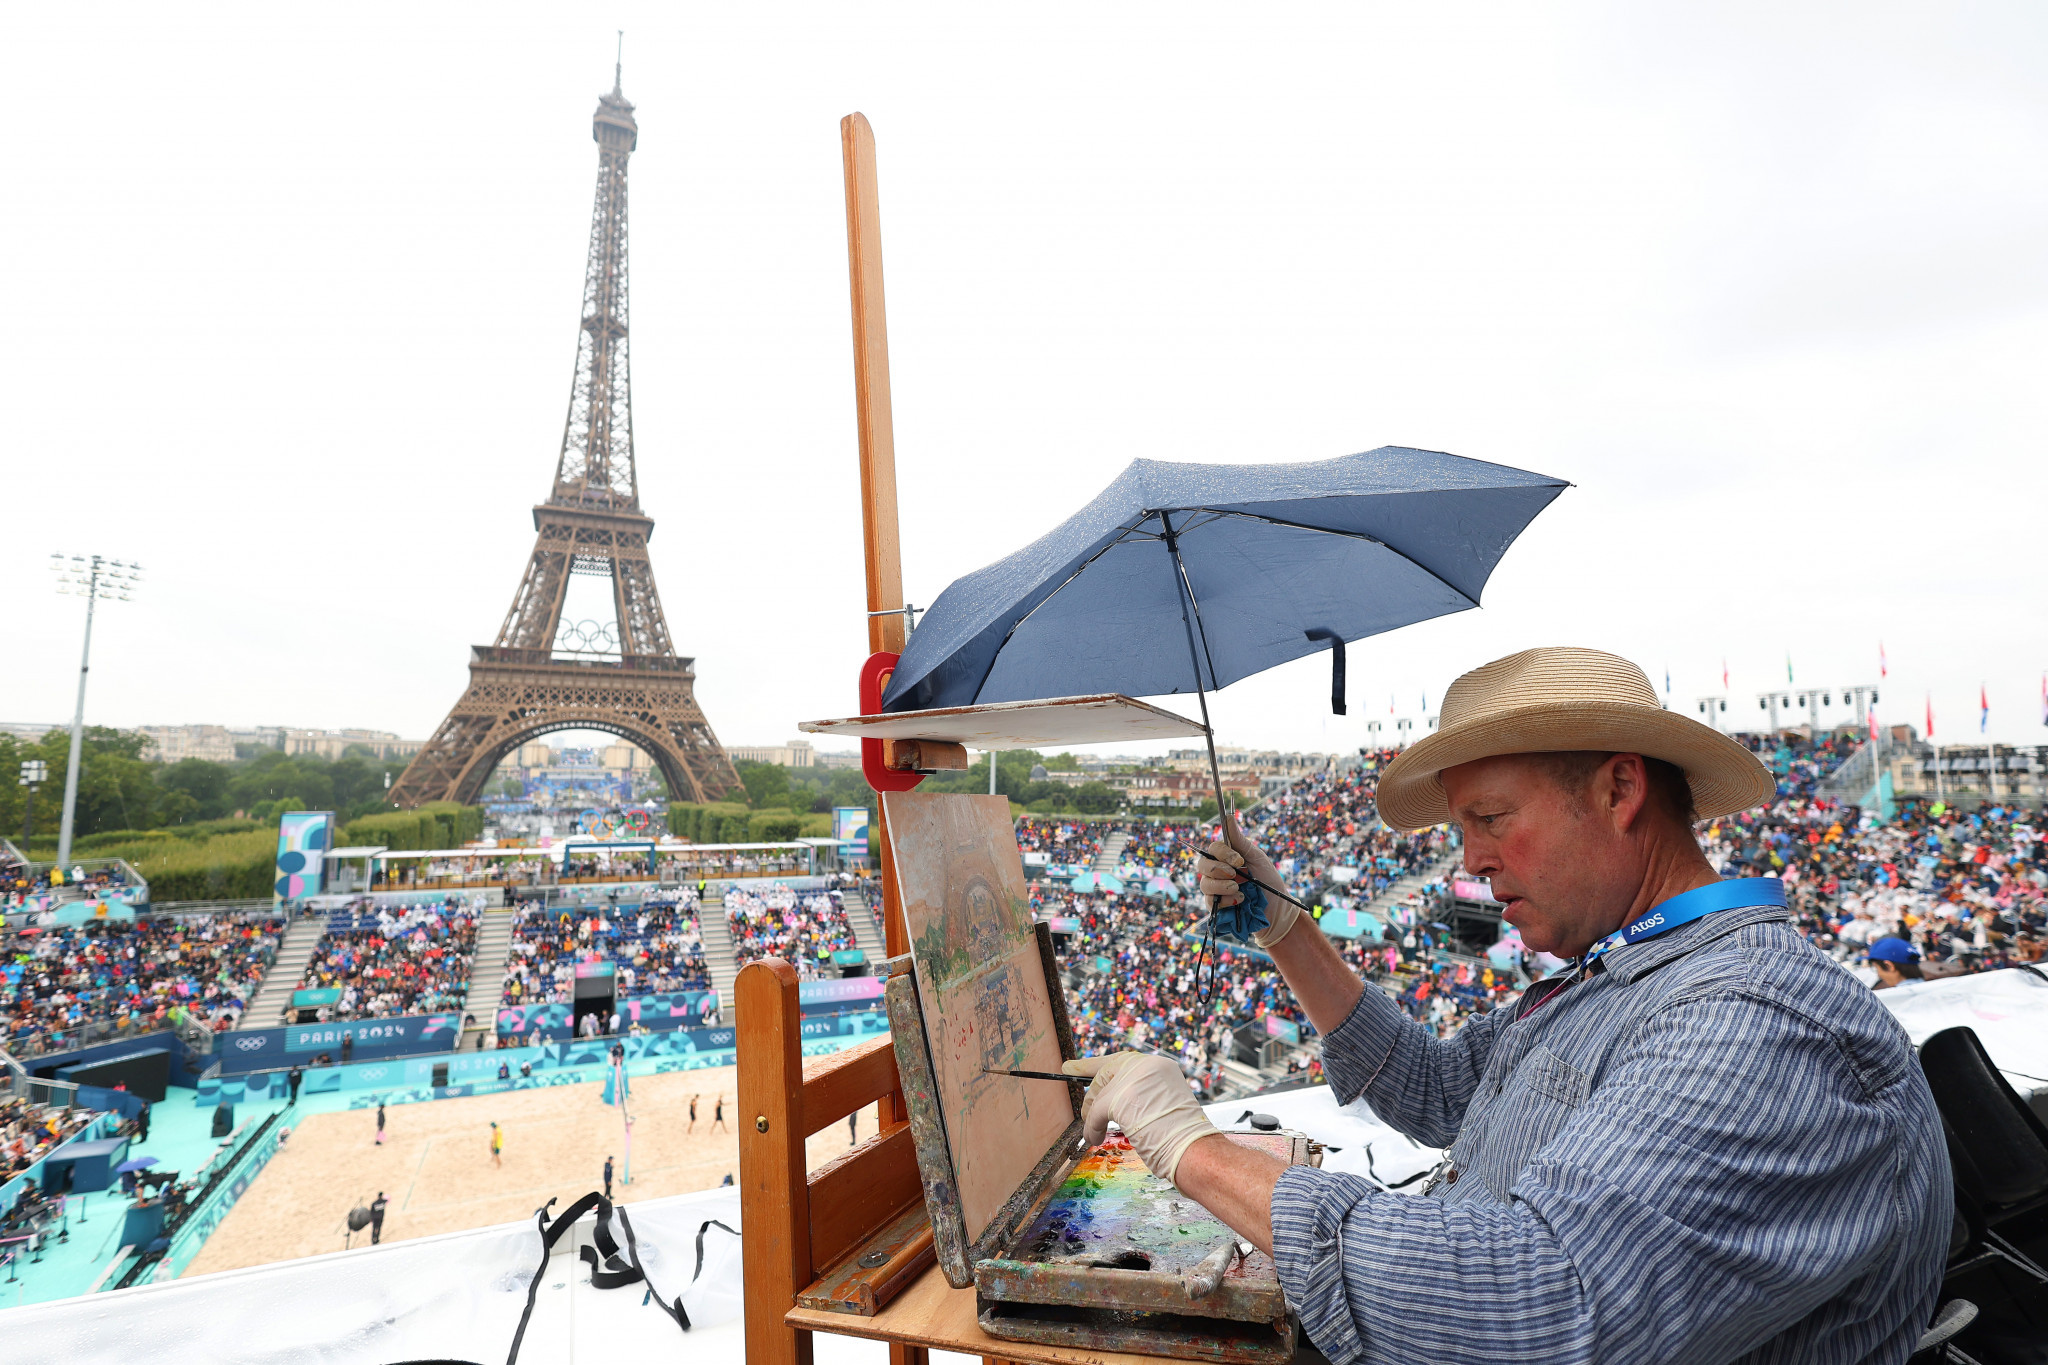 Spectators during a beach volleyball event at the Eiffel Tower Stadium during the Paris 2024 Olympic Games. GETTY IMAGES.